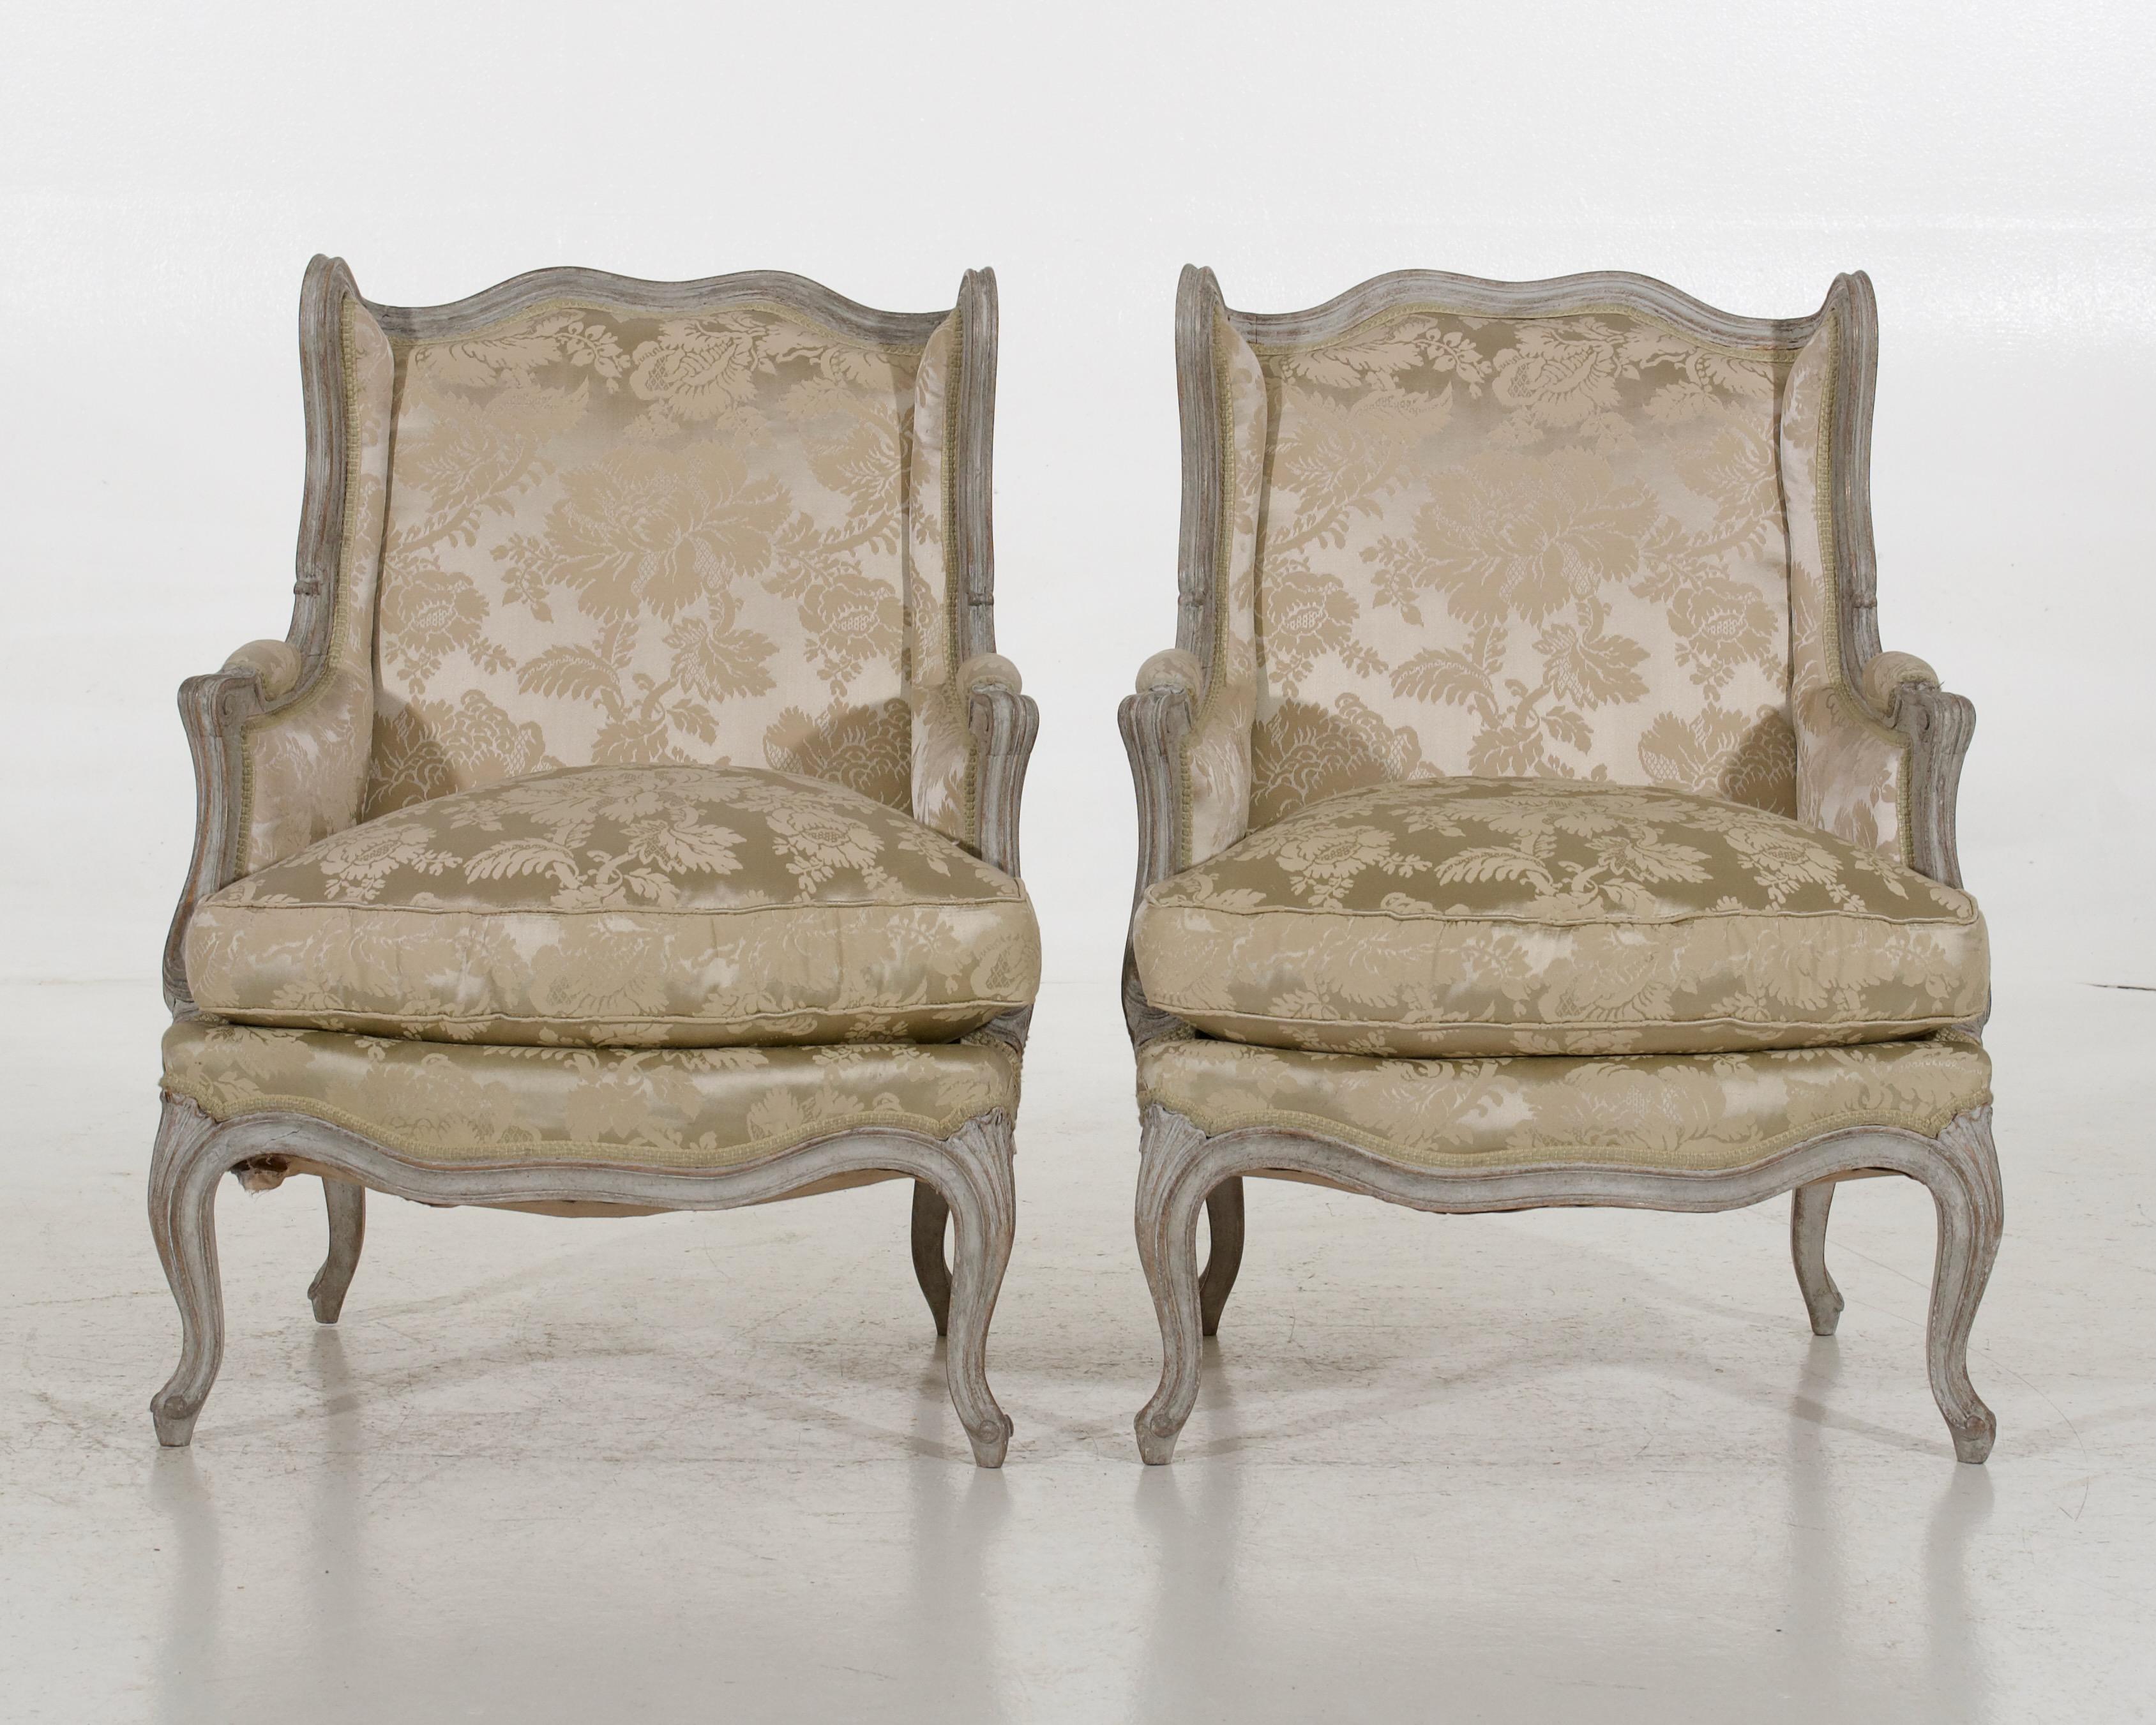 Charming pair of Rococo style armchairs, circa 100 years old.